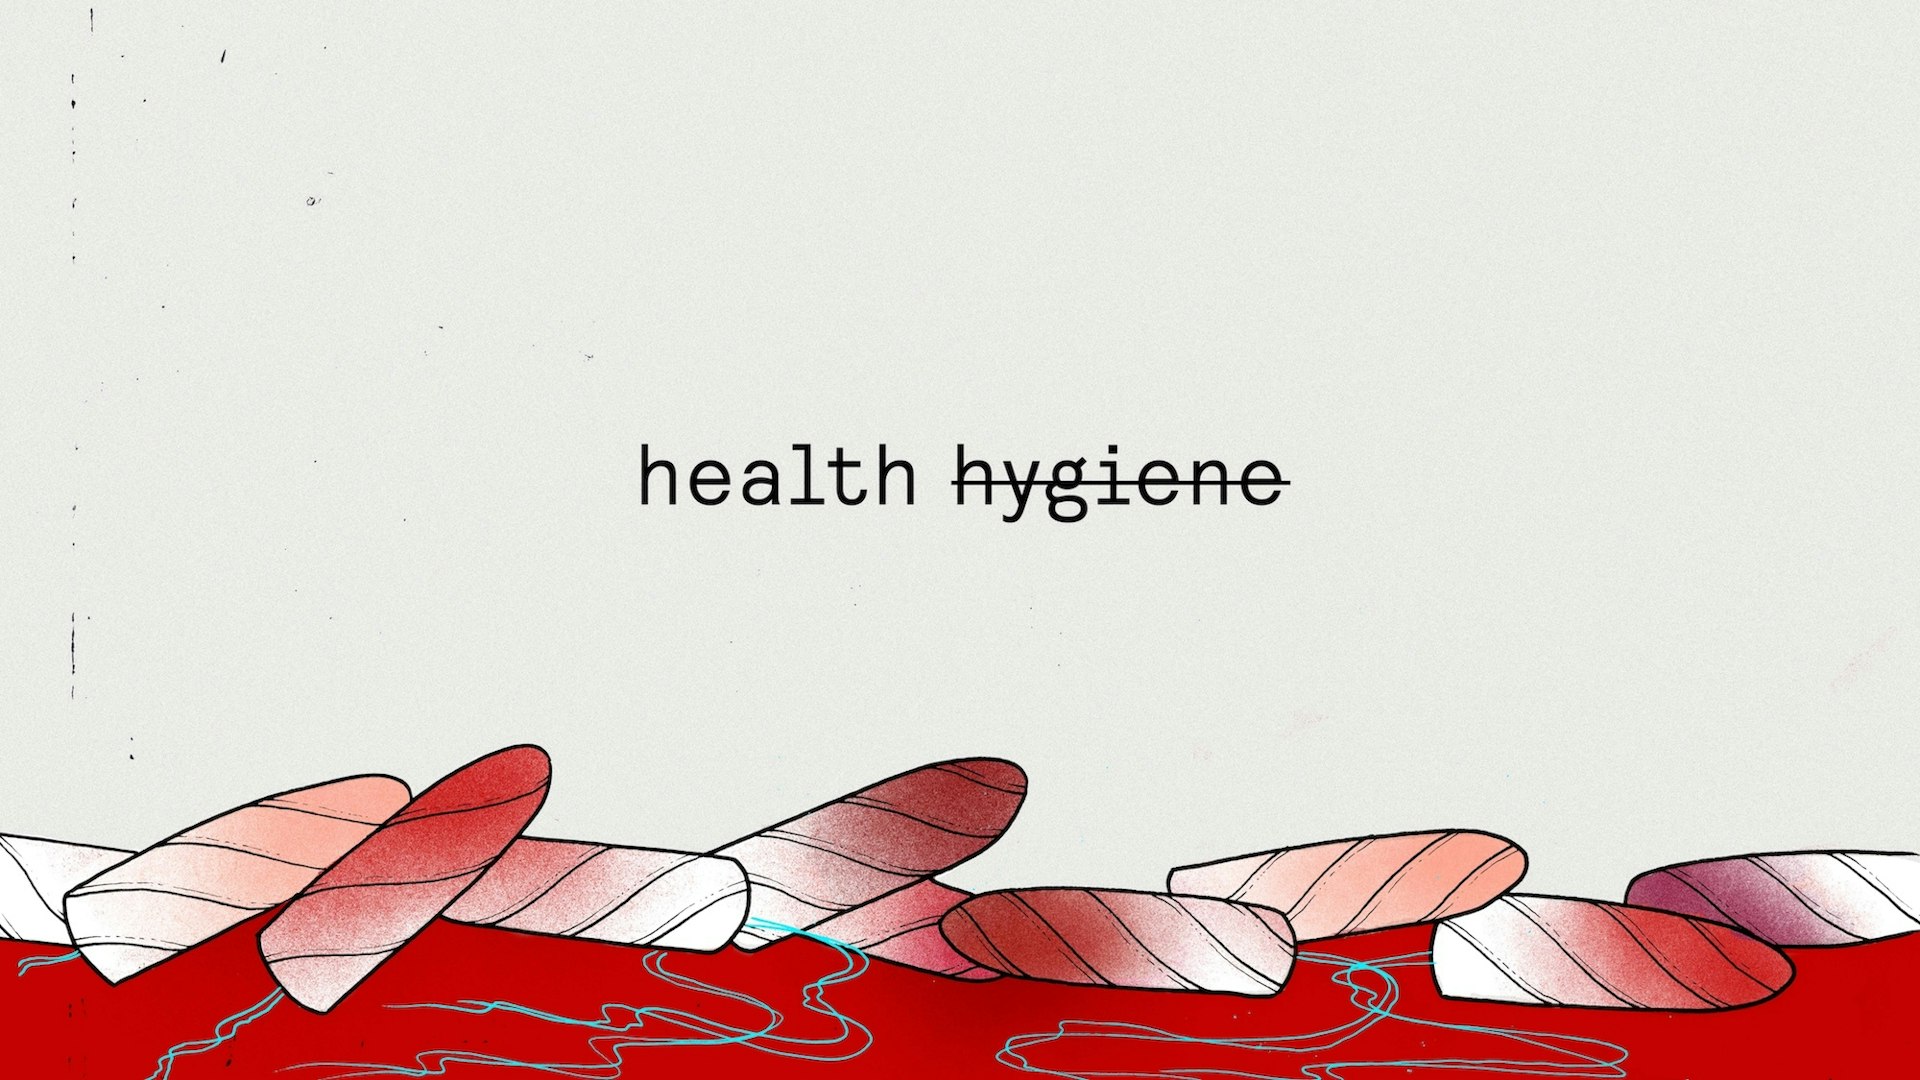 When it comes to periods, hygiene is a dirty word